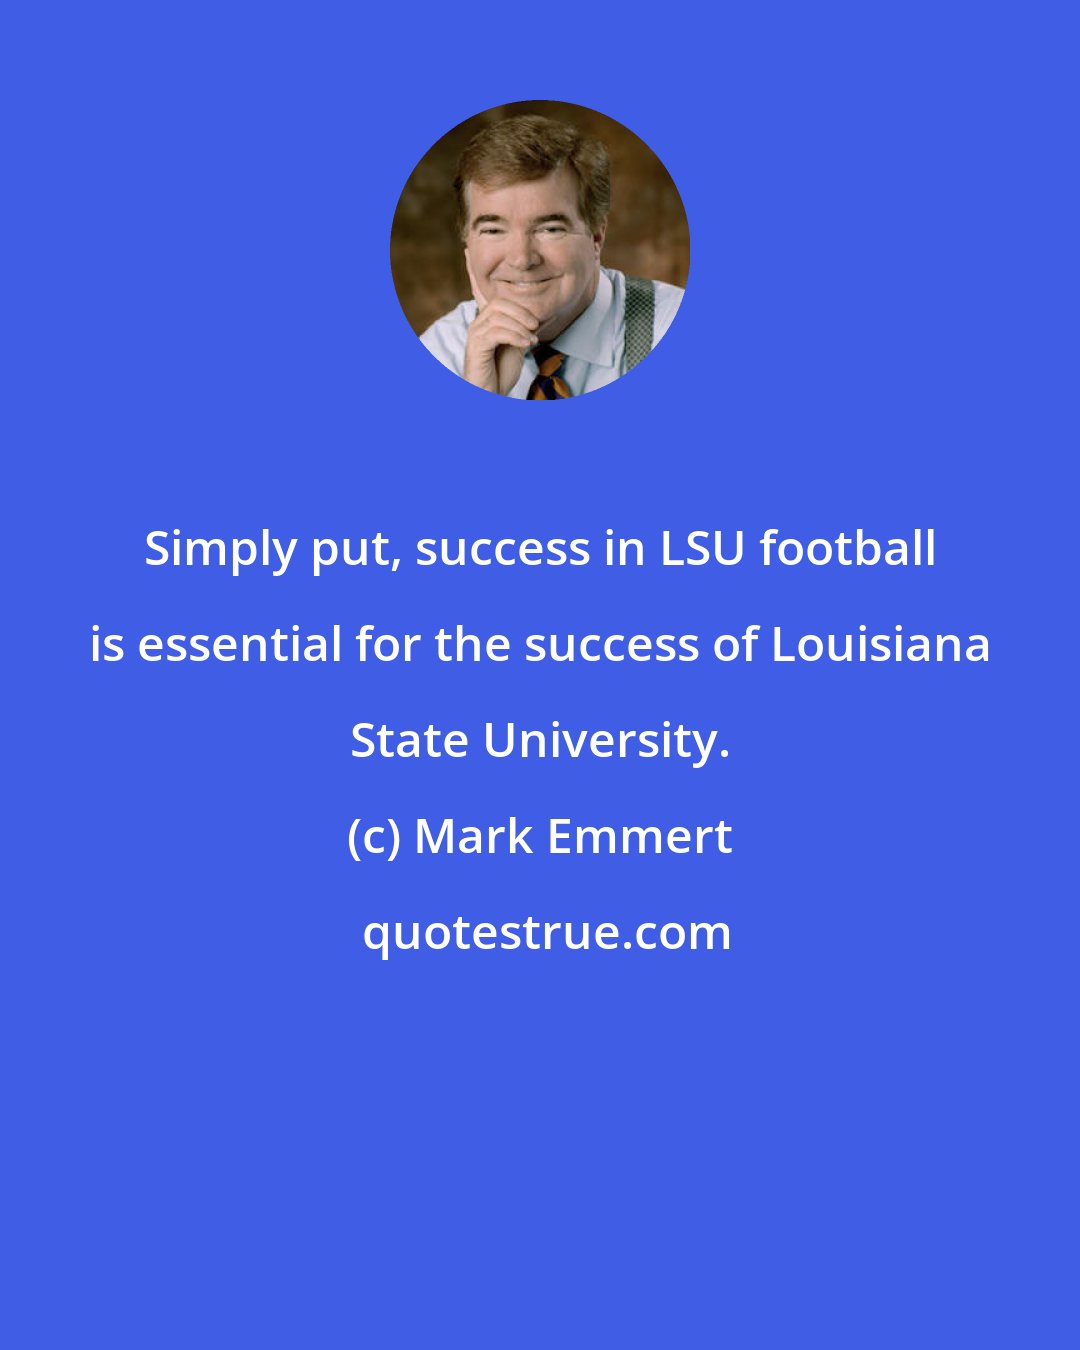 Mark Emmert: Simply put, success in LSU football is essential for the success of Louisiana State University.